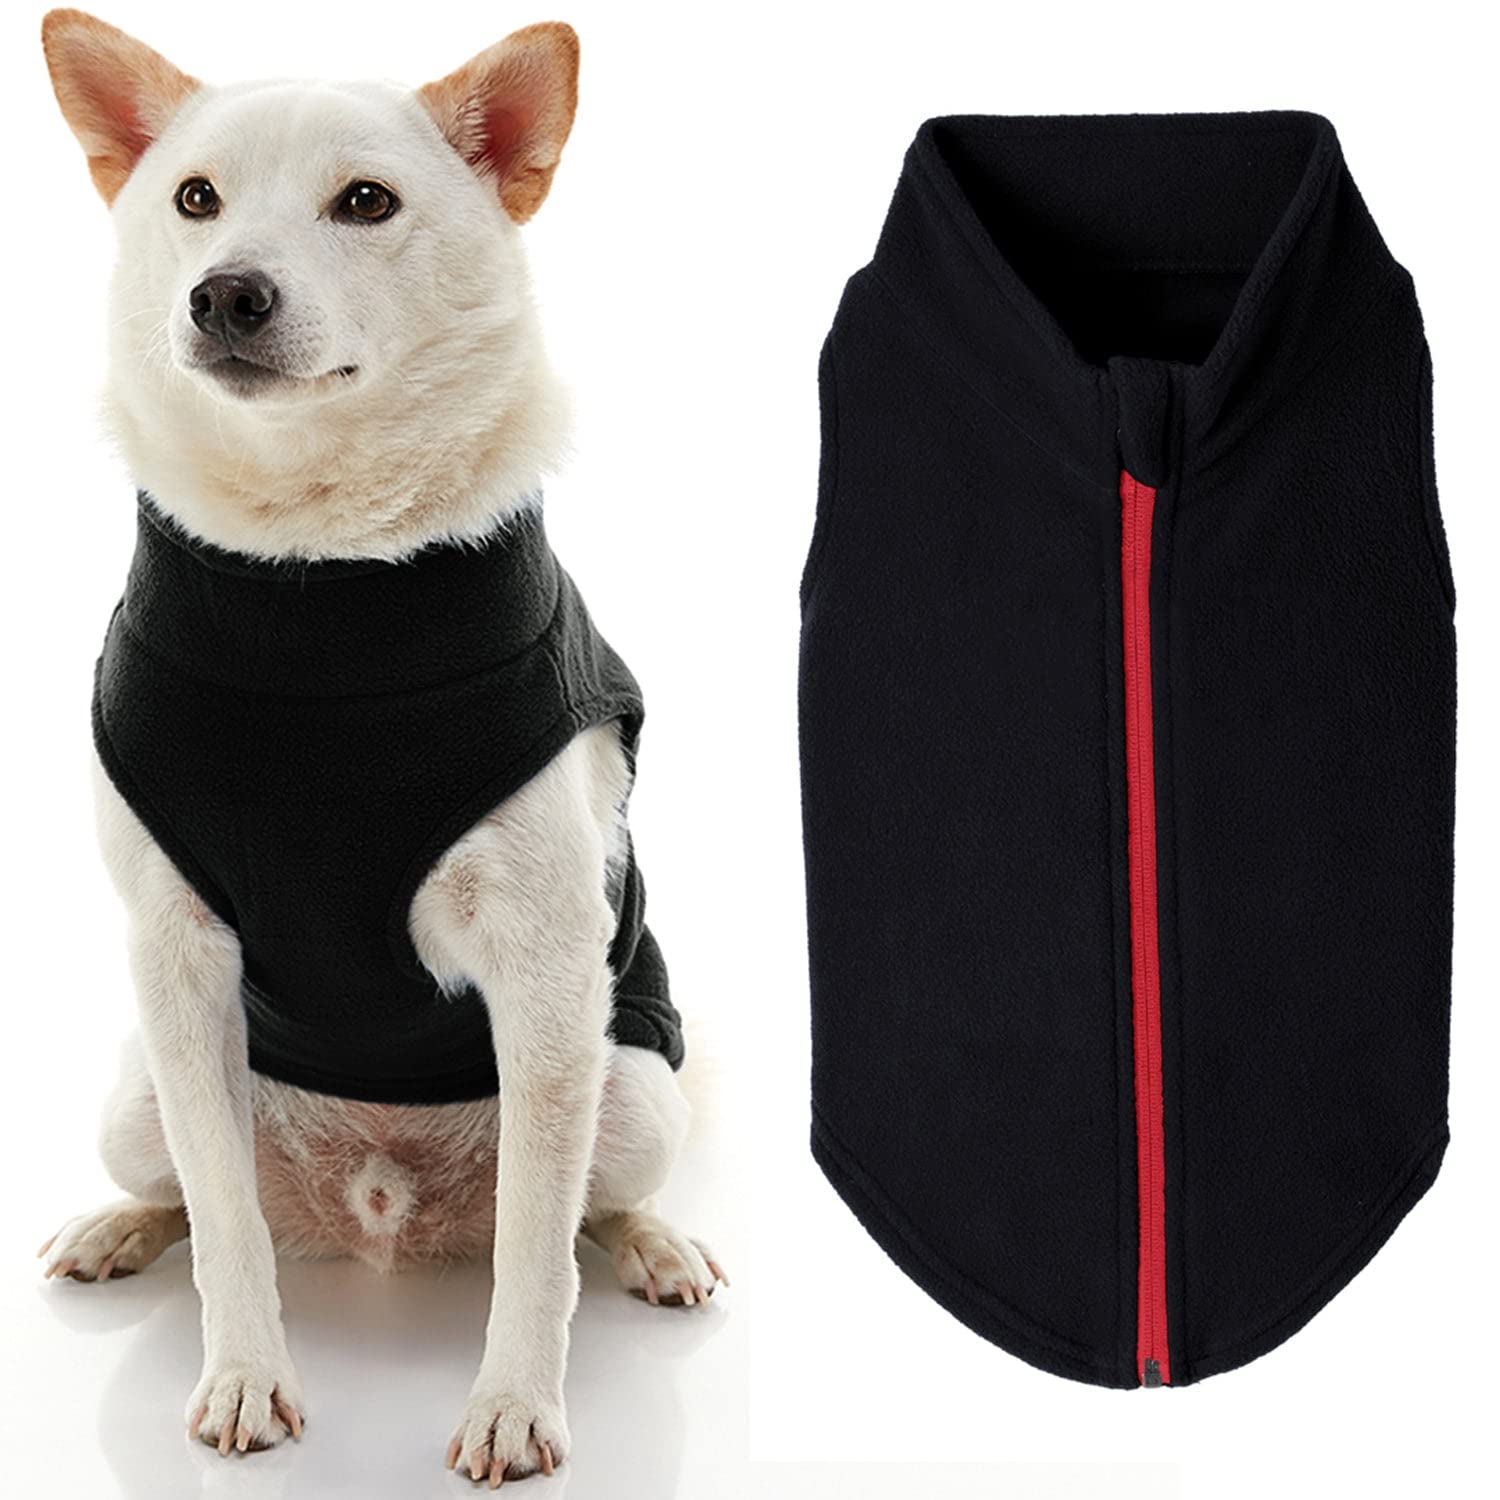 gooby Zip Up Fleece Dog Sweater - Black, 2X-Large - Warm Pullover Fleece Step-in Dog Jacket with Dual D Ring Leash - Winter Smal